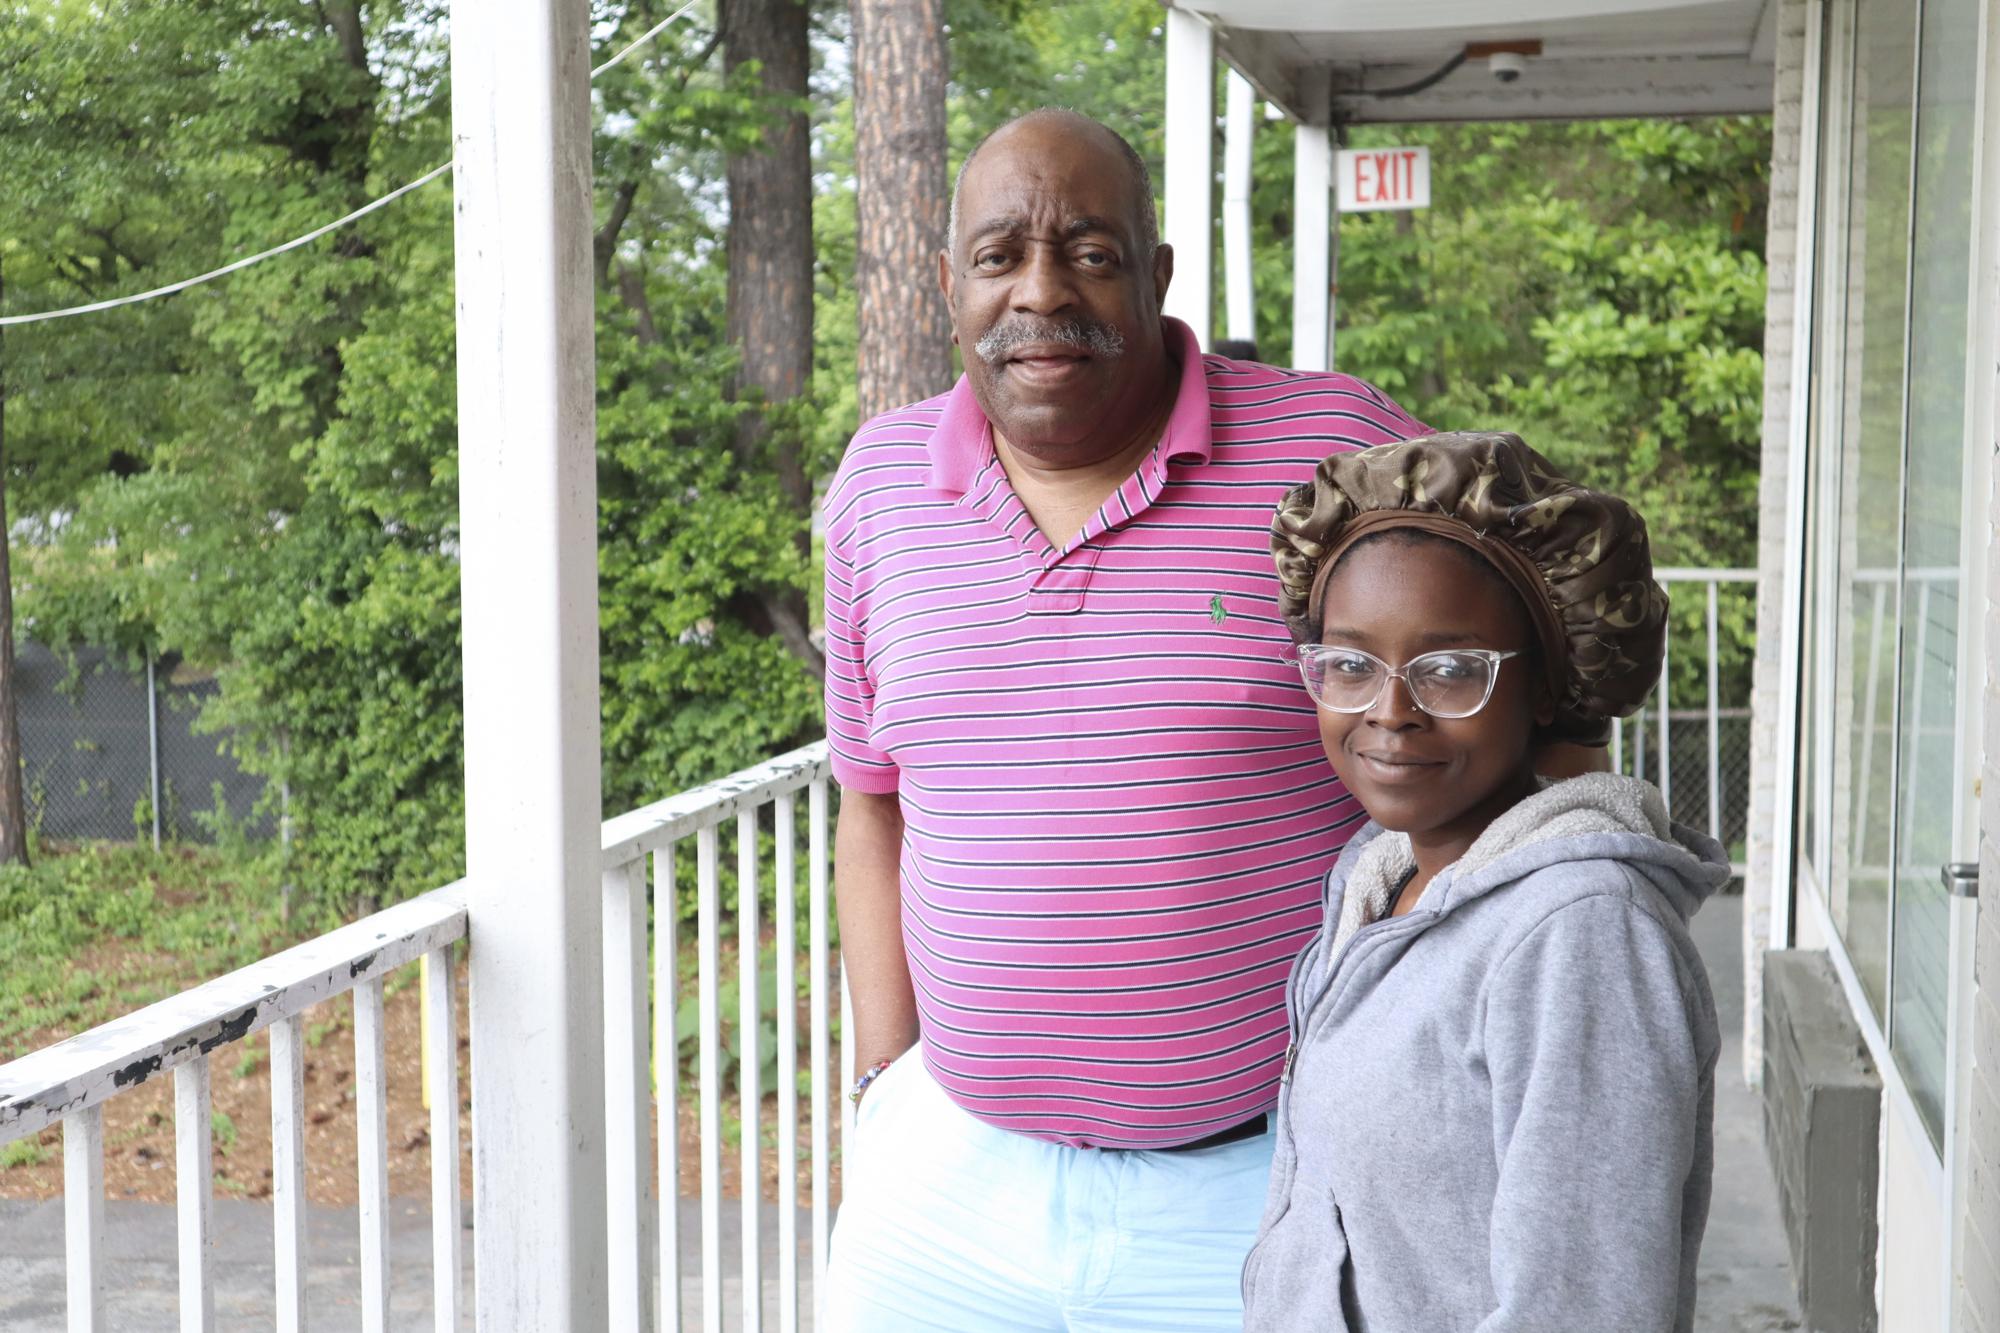 Dana Williams and his daughter De'mai Williams stand outside a low-cost hotel in Atlanta on May 18, 2023. The two have been looking for an affordable place to live ever since they were evicted from their two-bedroom apartment in April. (AP Photo/R.J. Rico)